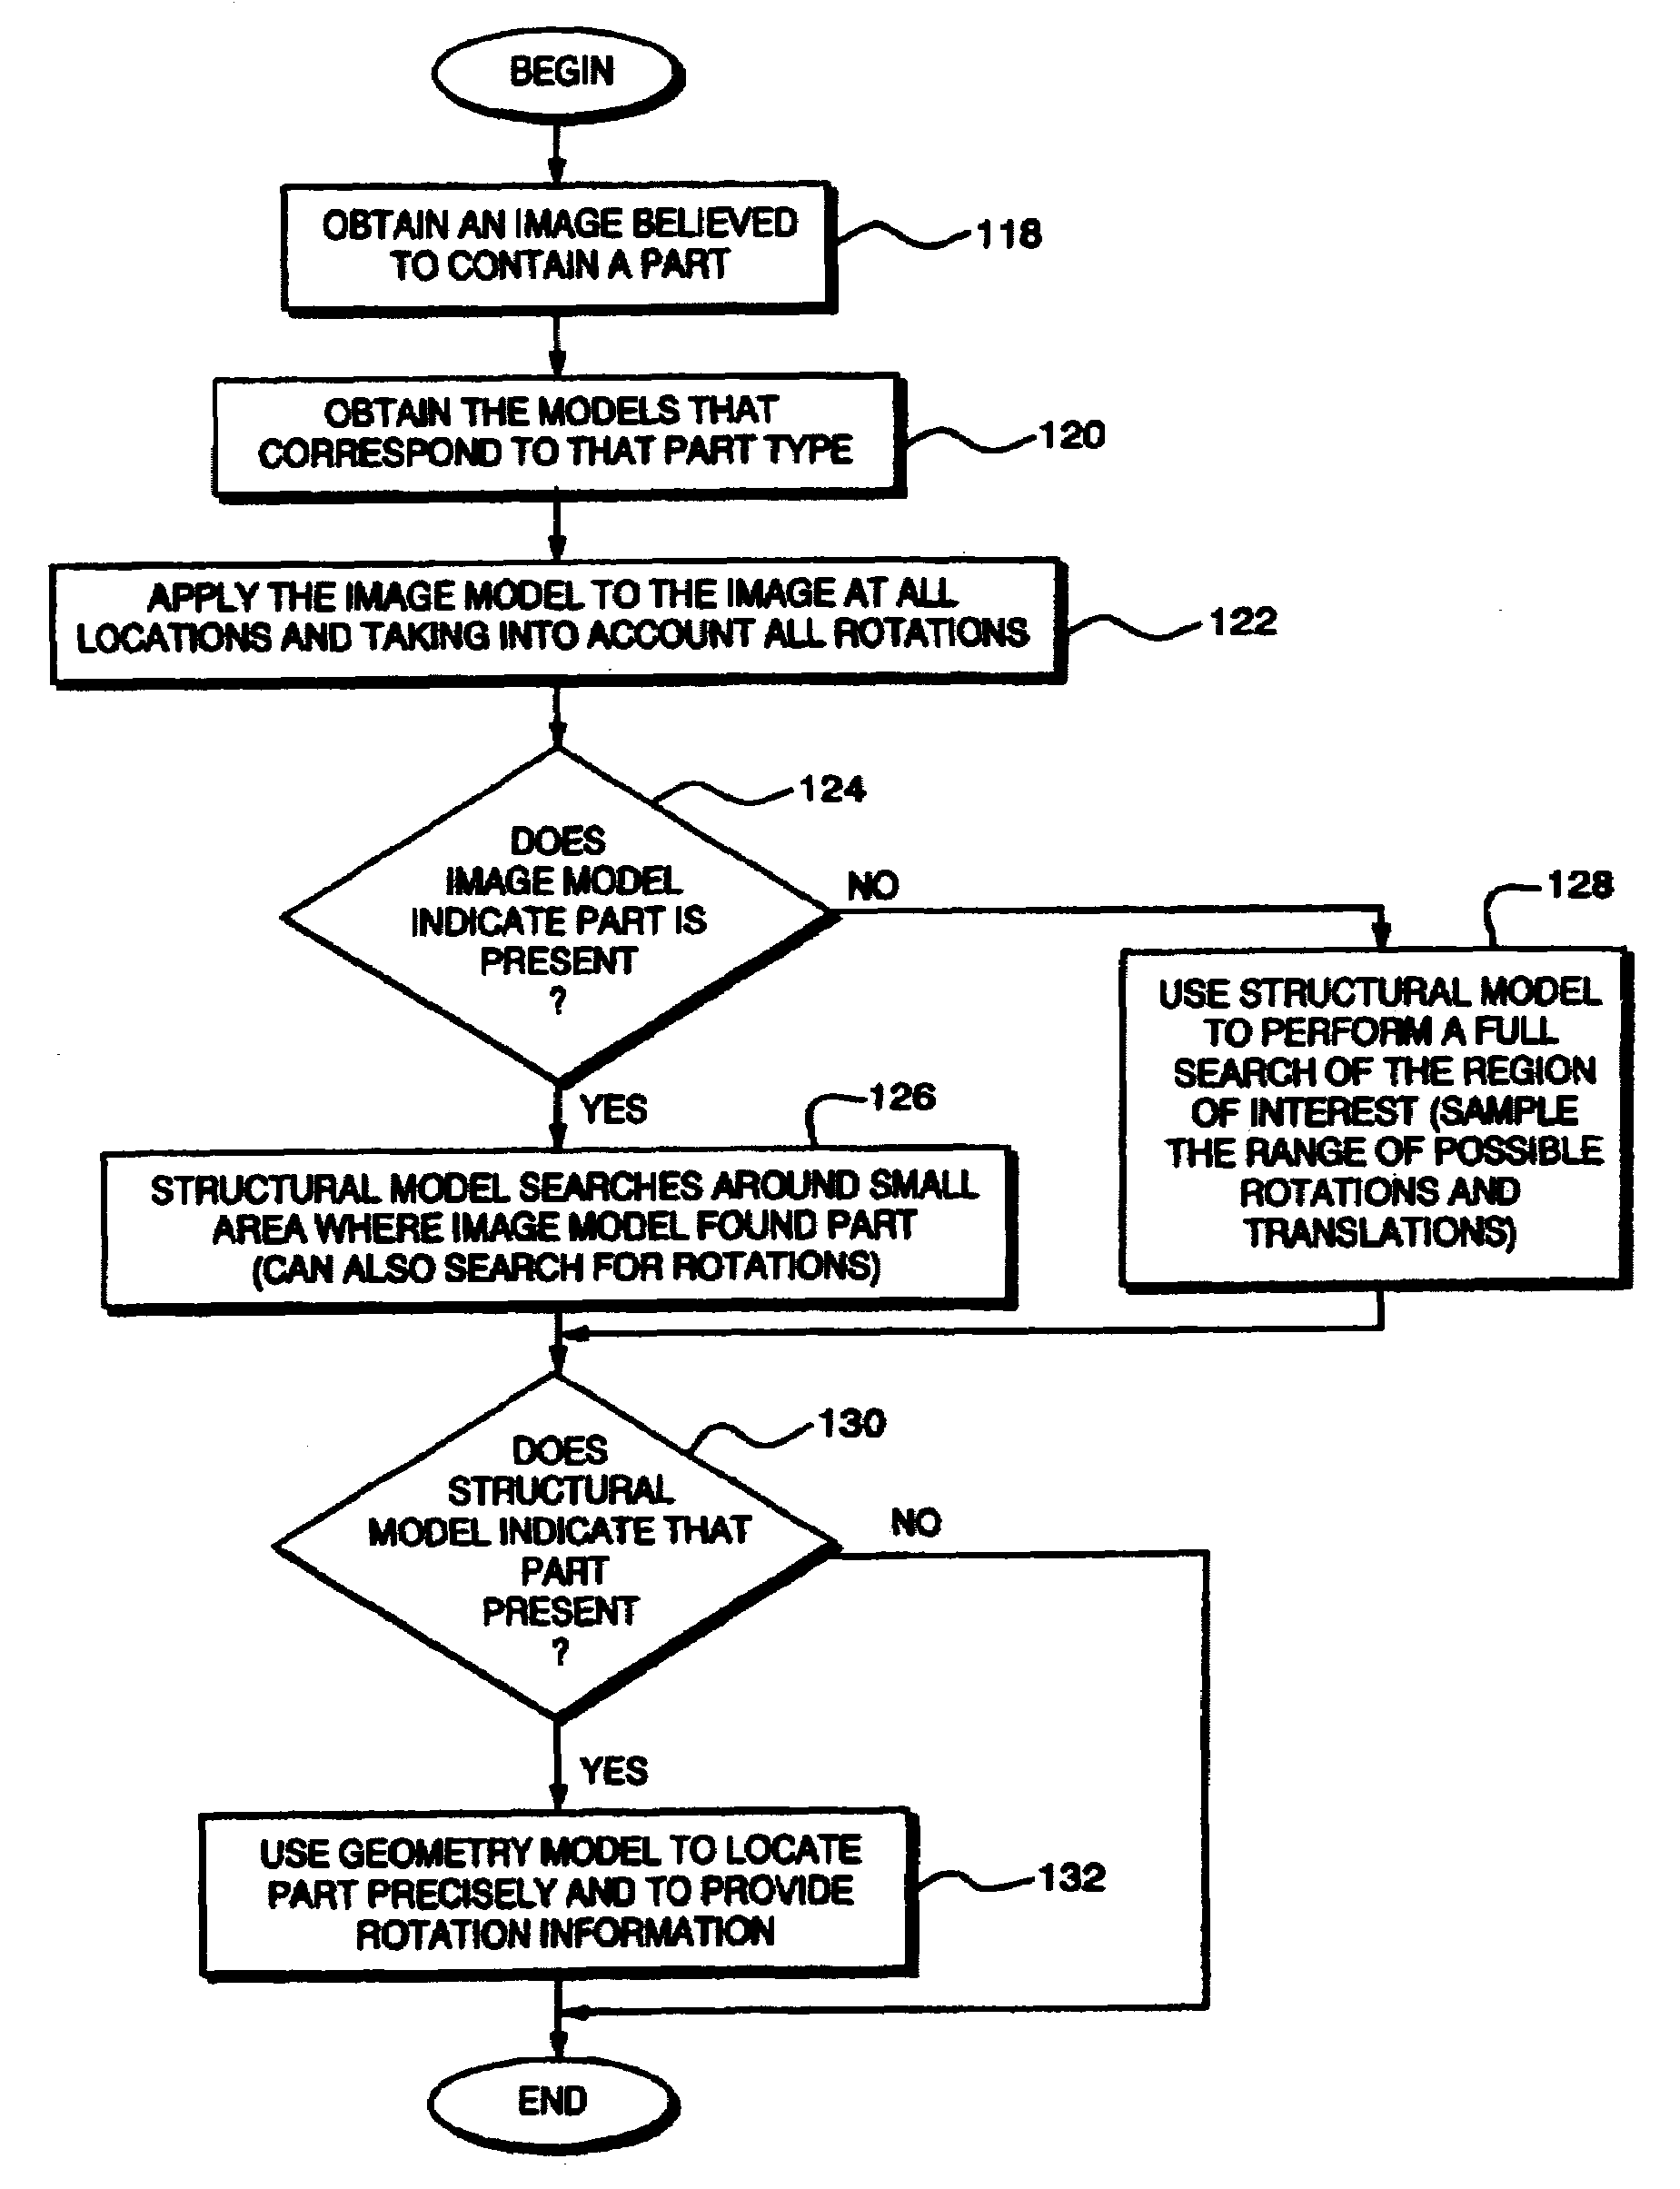 Image processing system for use with inspection systems